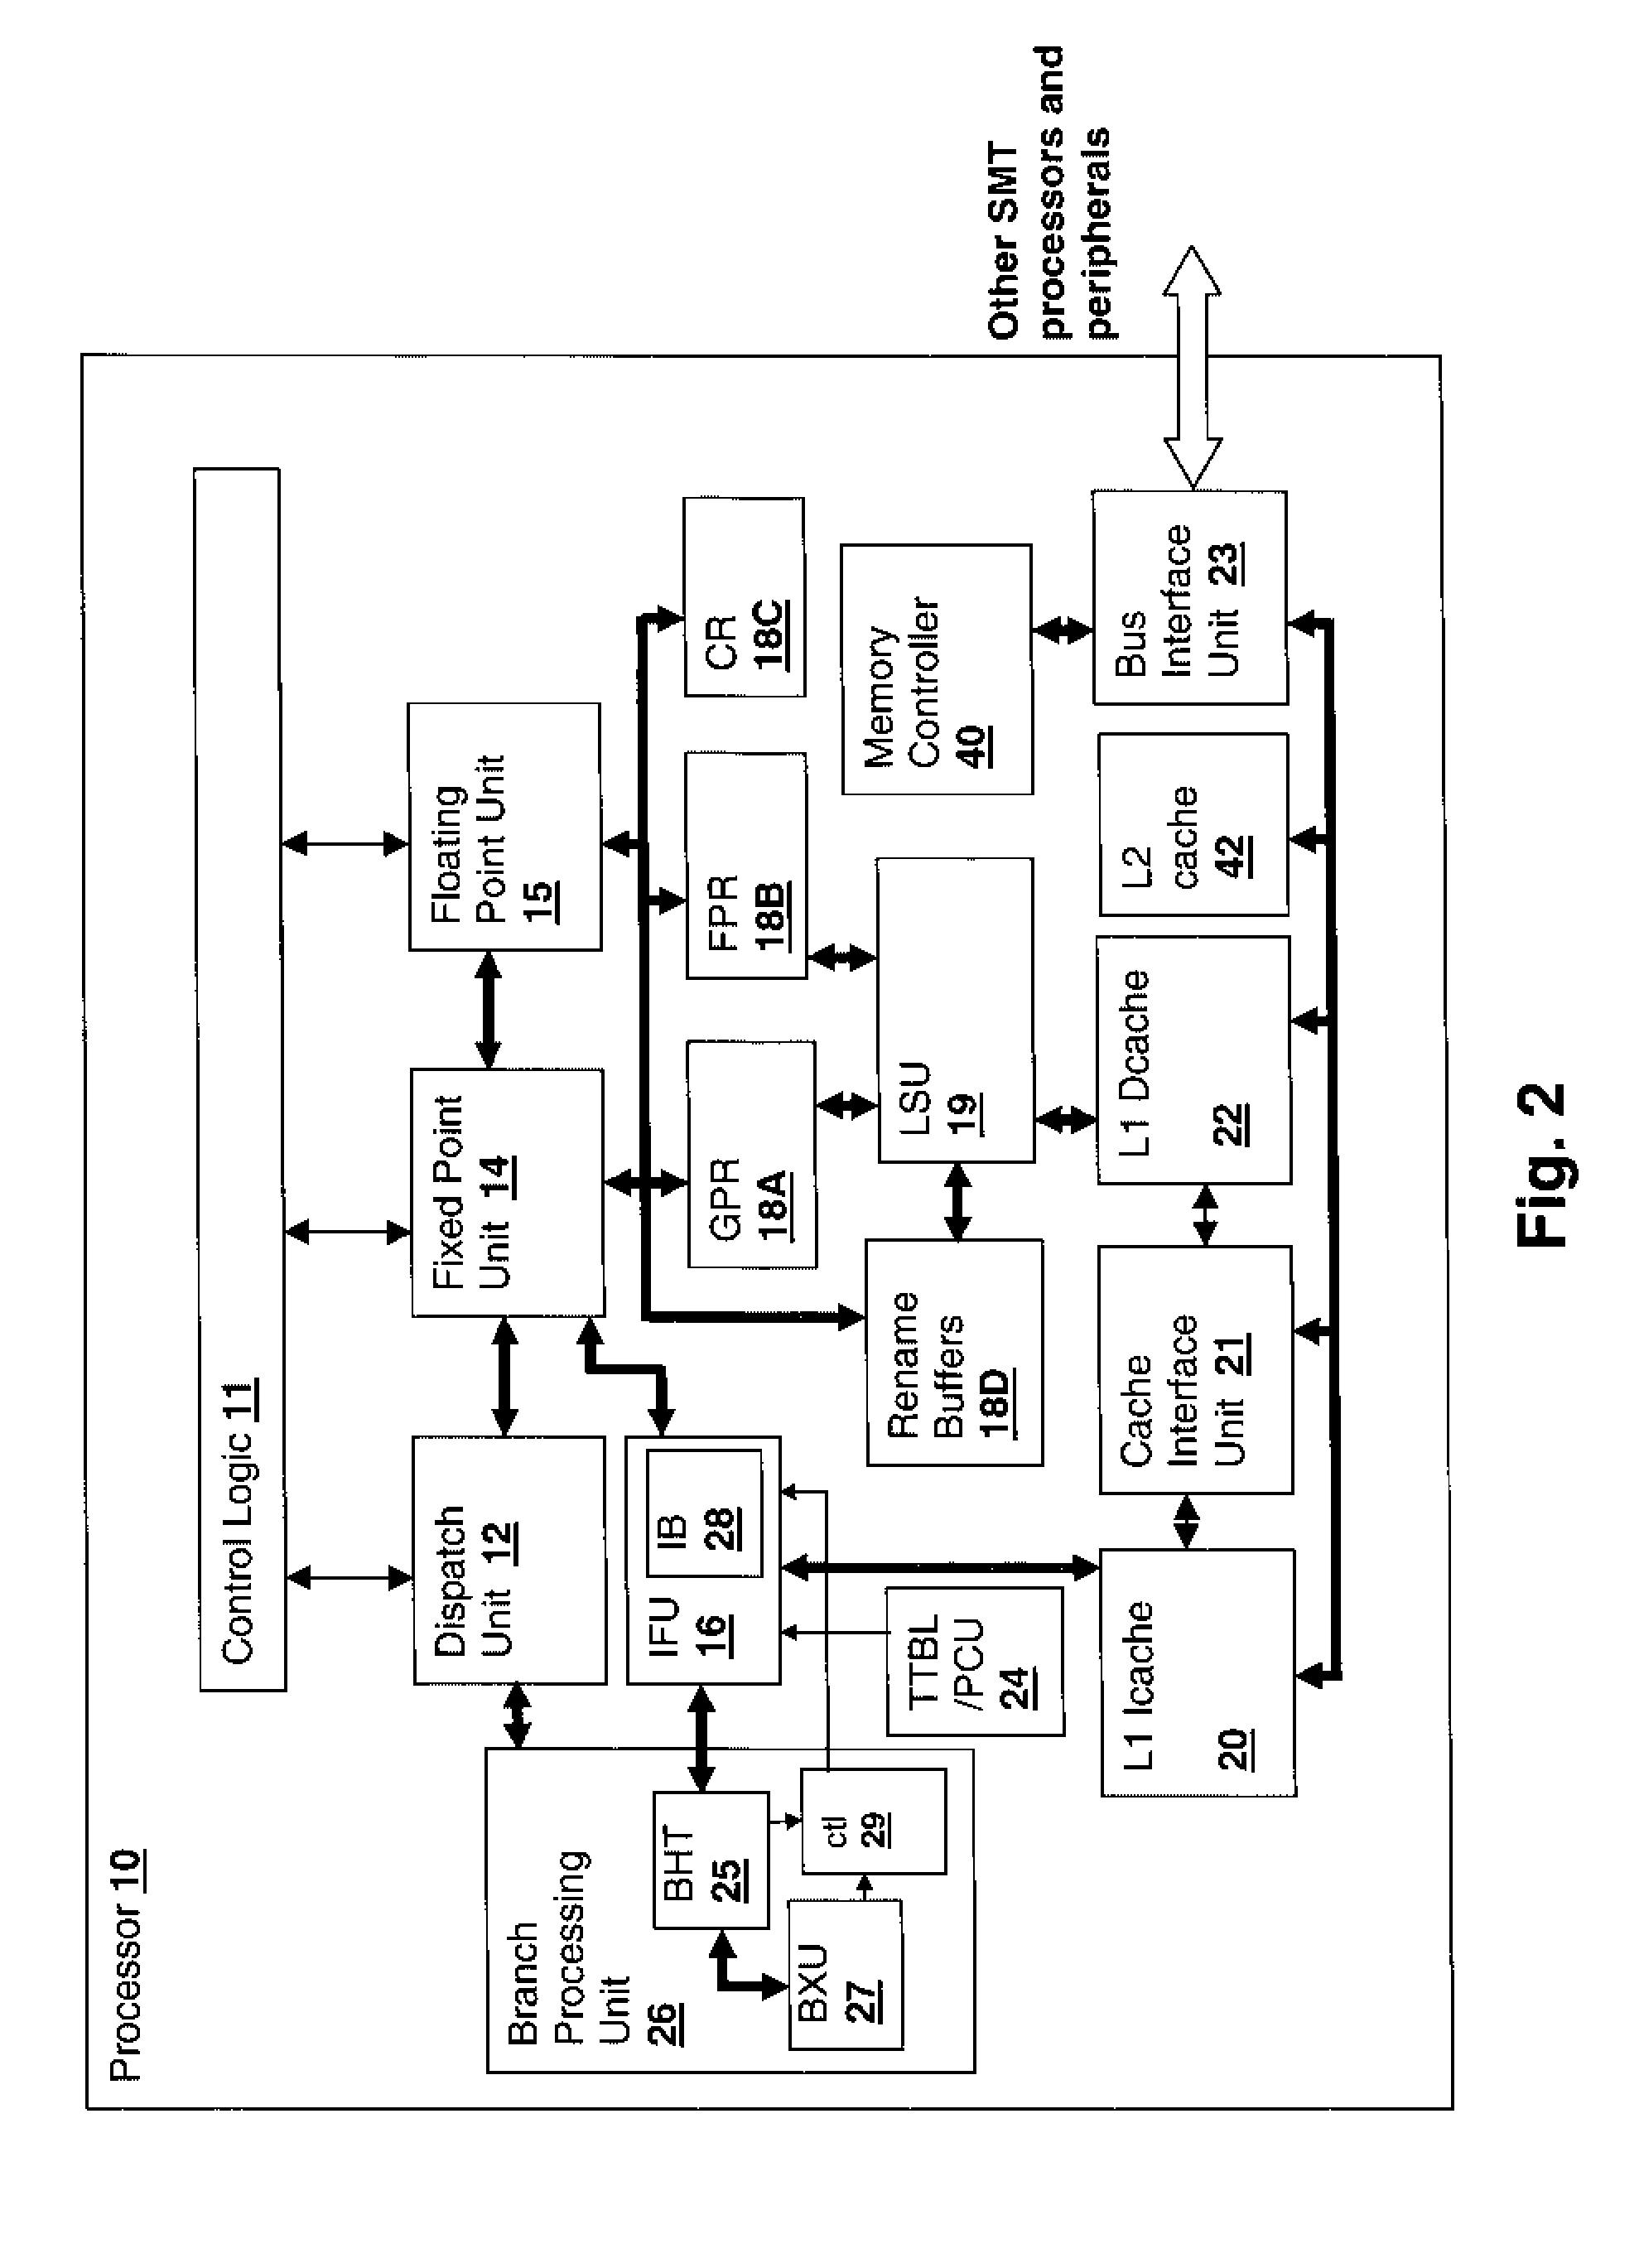 Method and Apparatus for Dynamically Managing Instruction Buffer Depths for Non-Predicted Branches